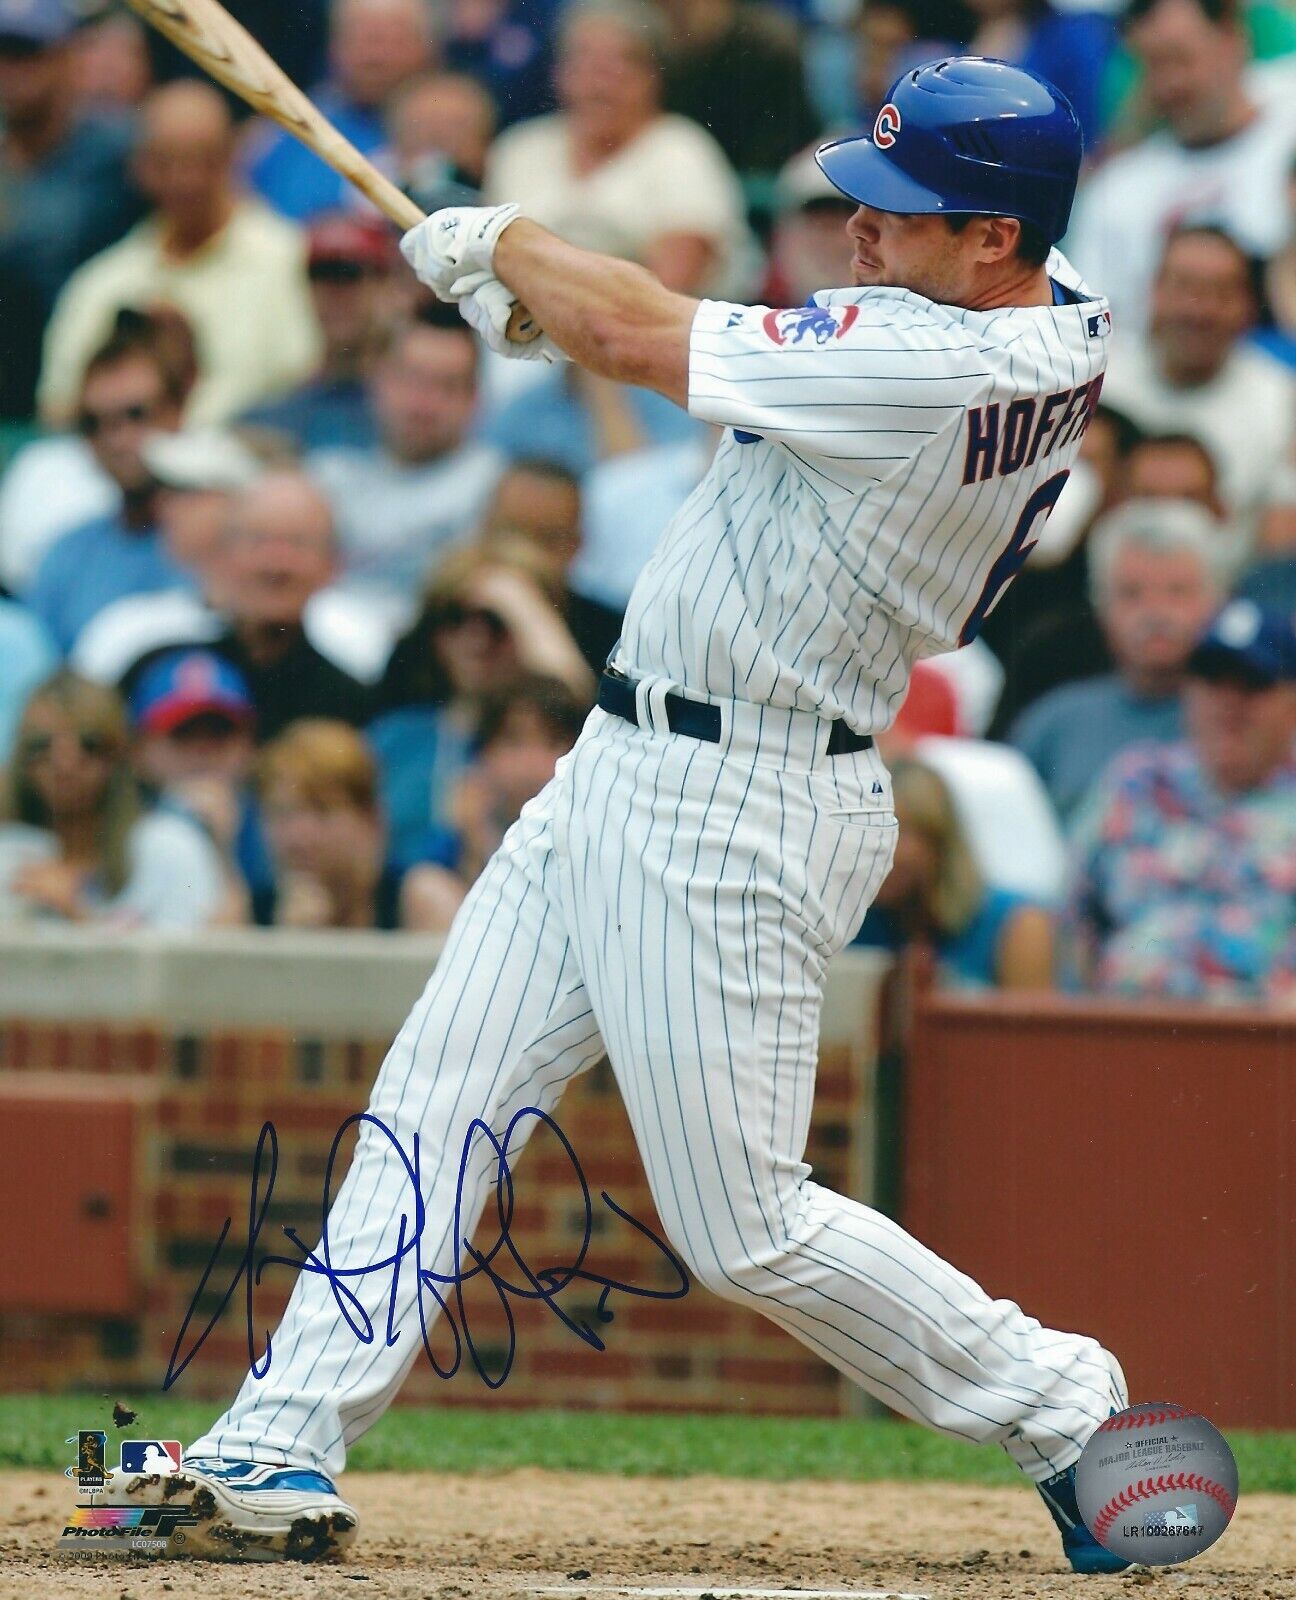 Signed 8x10 MICAH HOFFPAUIR Chicago Cubs Autographed Photo Poster painting - COA